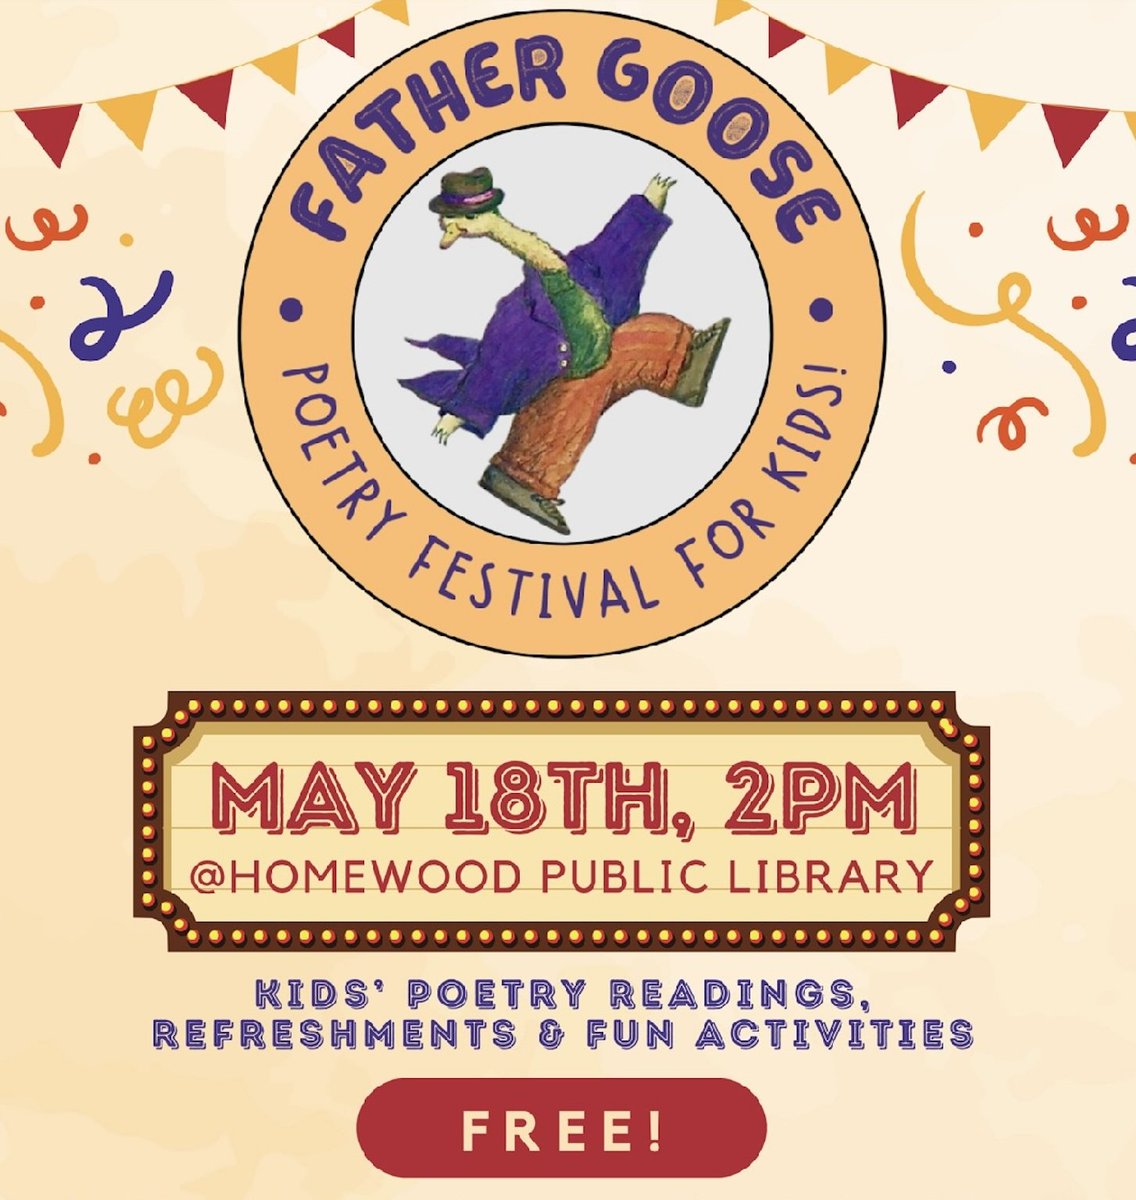 Come join the fun with us this Saturday, 2 pm at the Homewood Public Library, Homewood, AL! Hear children (K-5) read their original poems. Refreshments and fun activities for all! 🥰